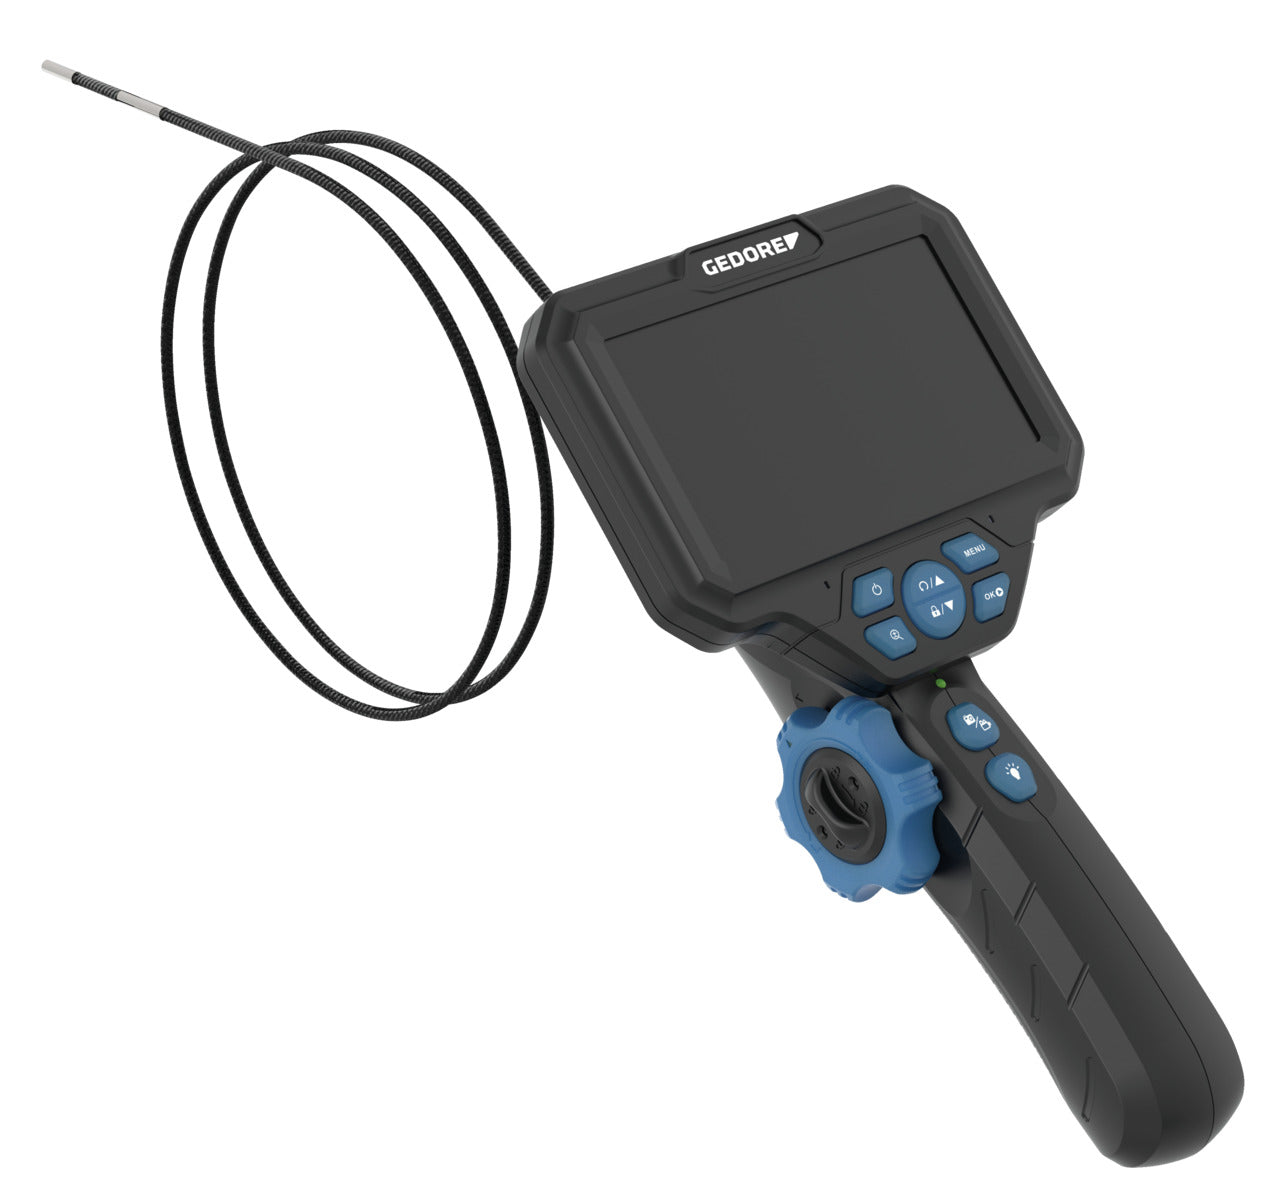 gedore micro videoscope with connection wire